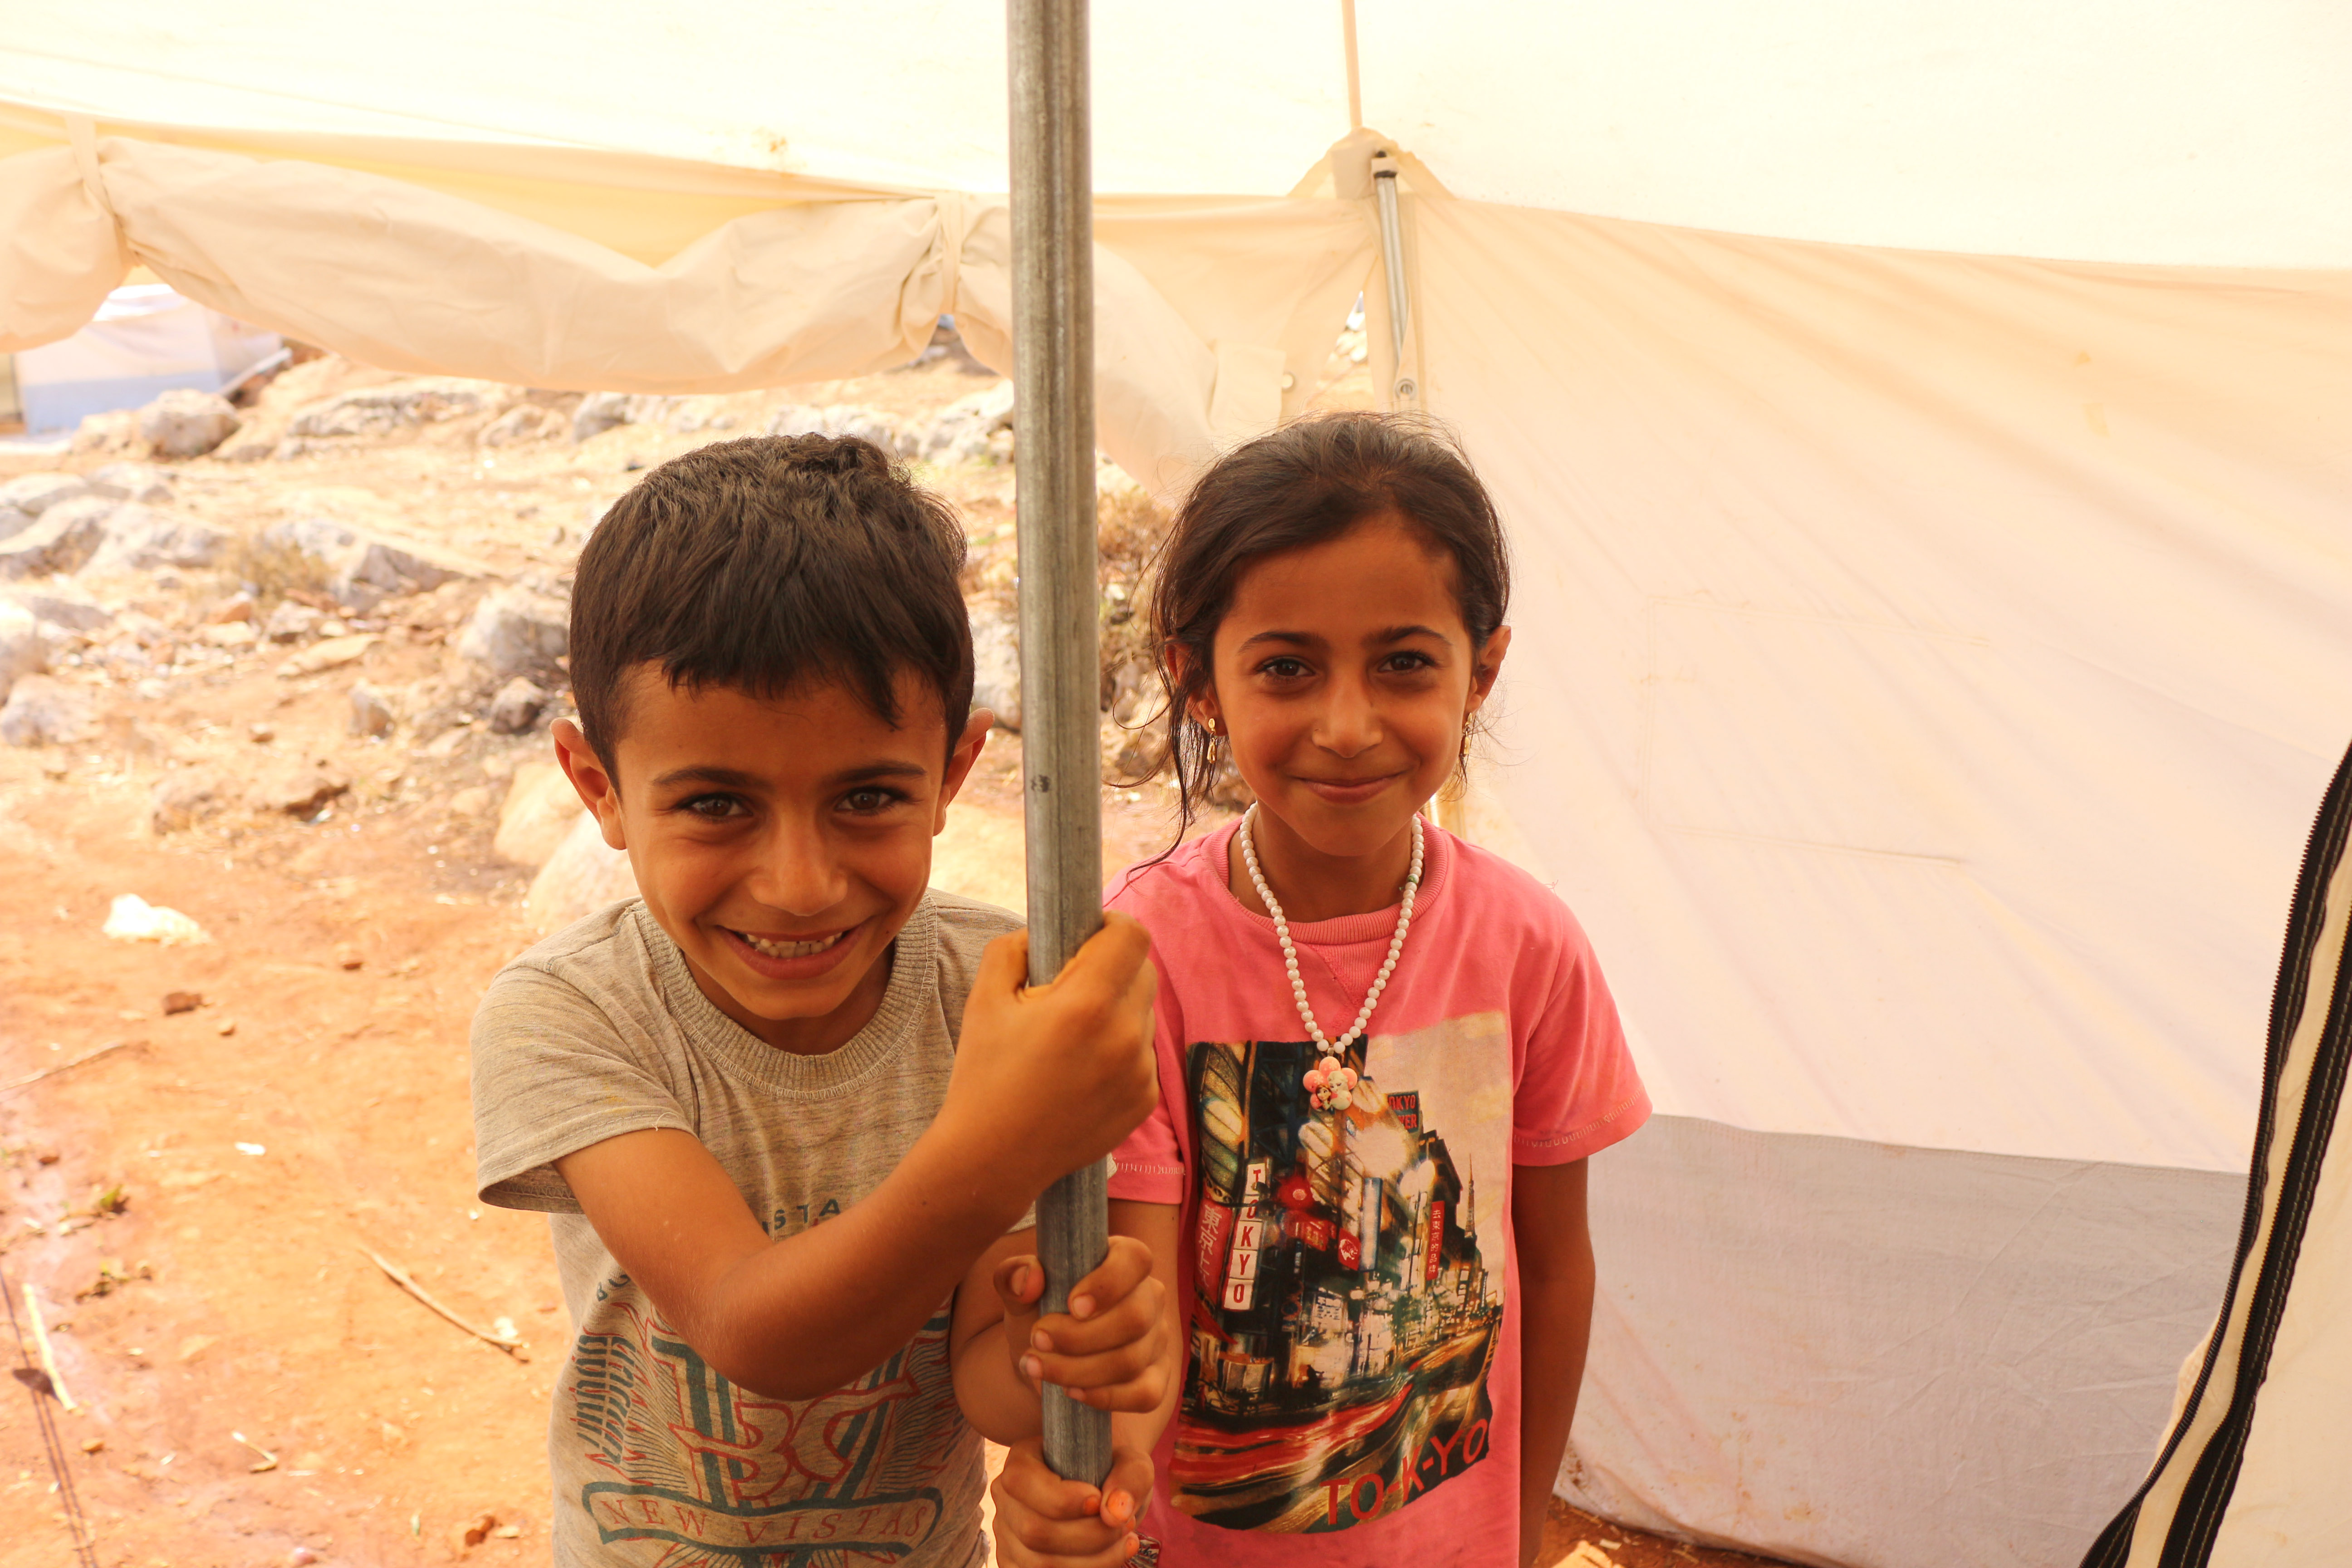 ShelterBox provides international disaster relief and emergency shelter in Syria, in response to ongoing conflict